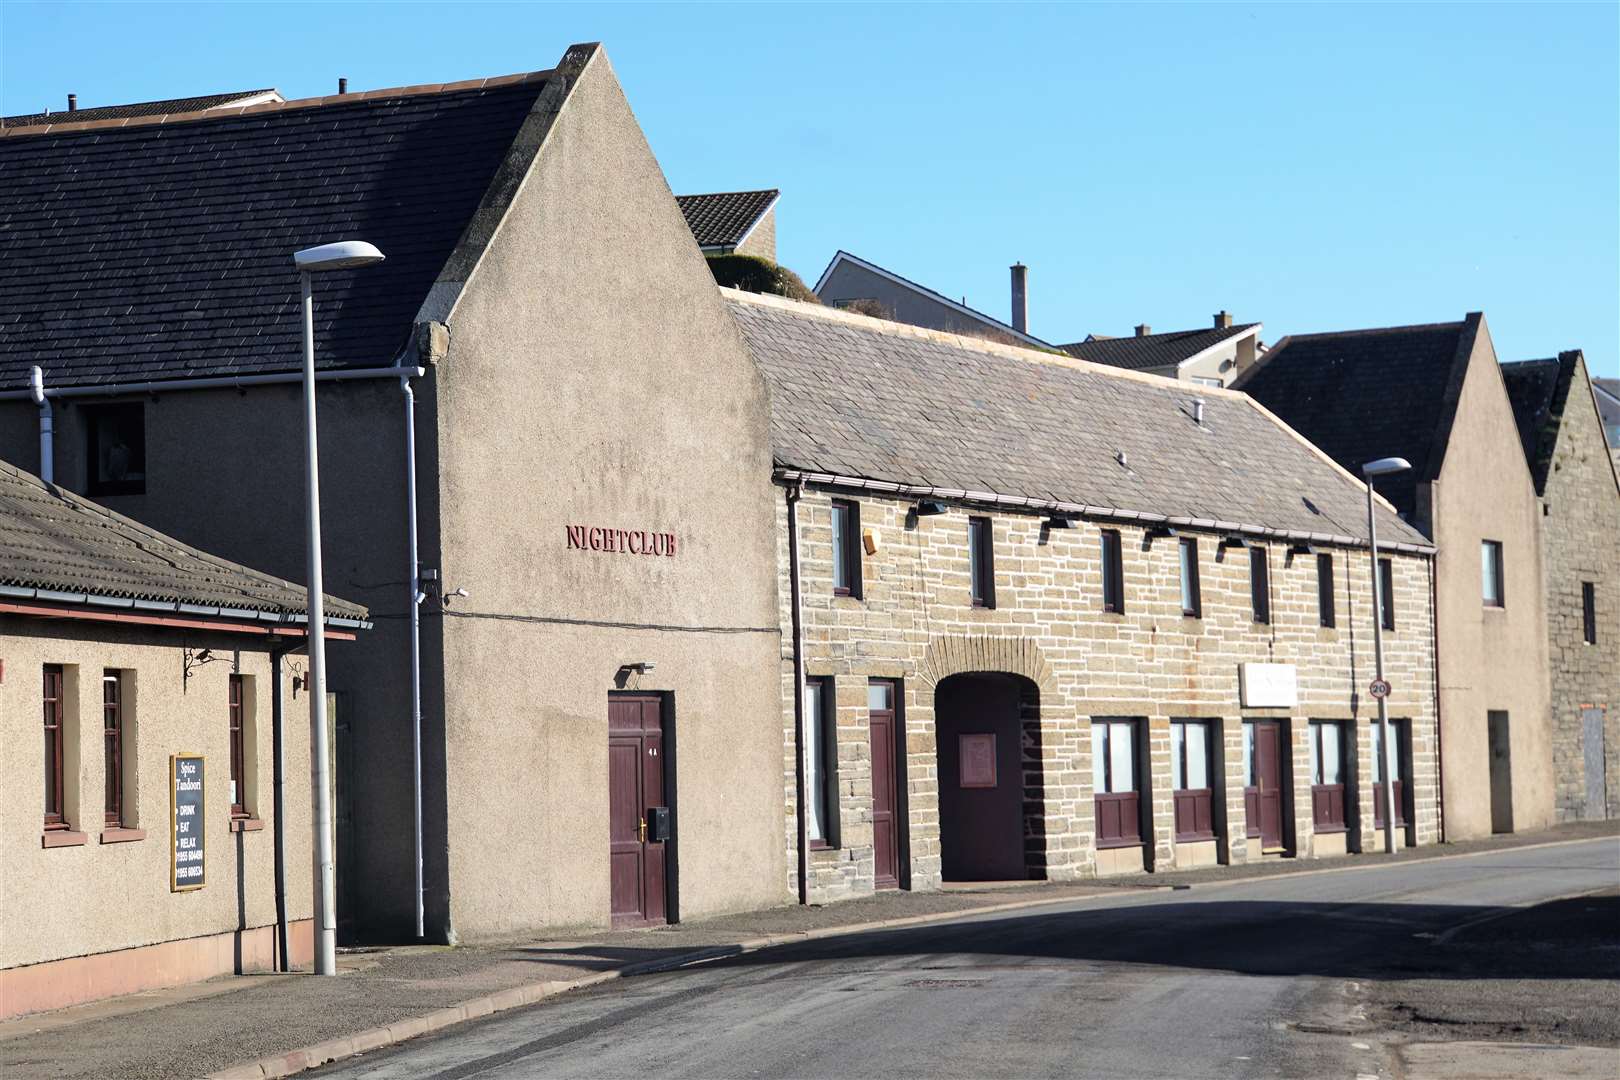 The incident is believed to have taken place inside the Waterfront nightclub in Wick.